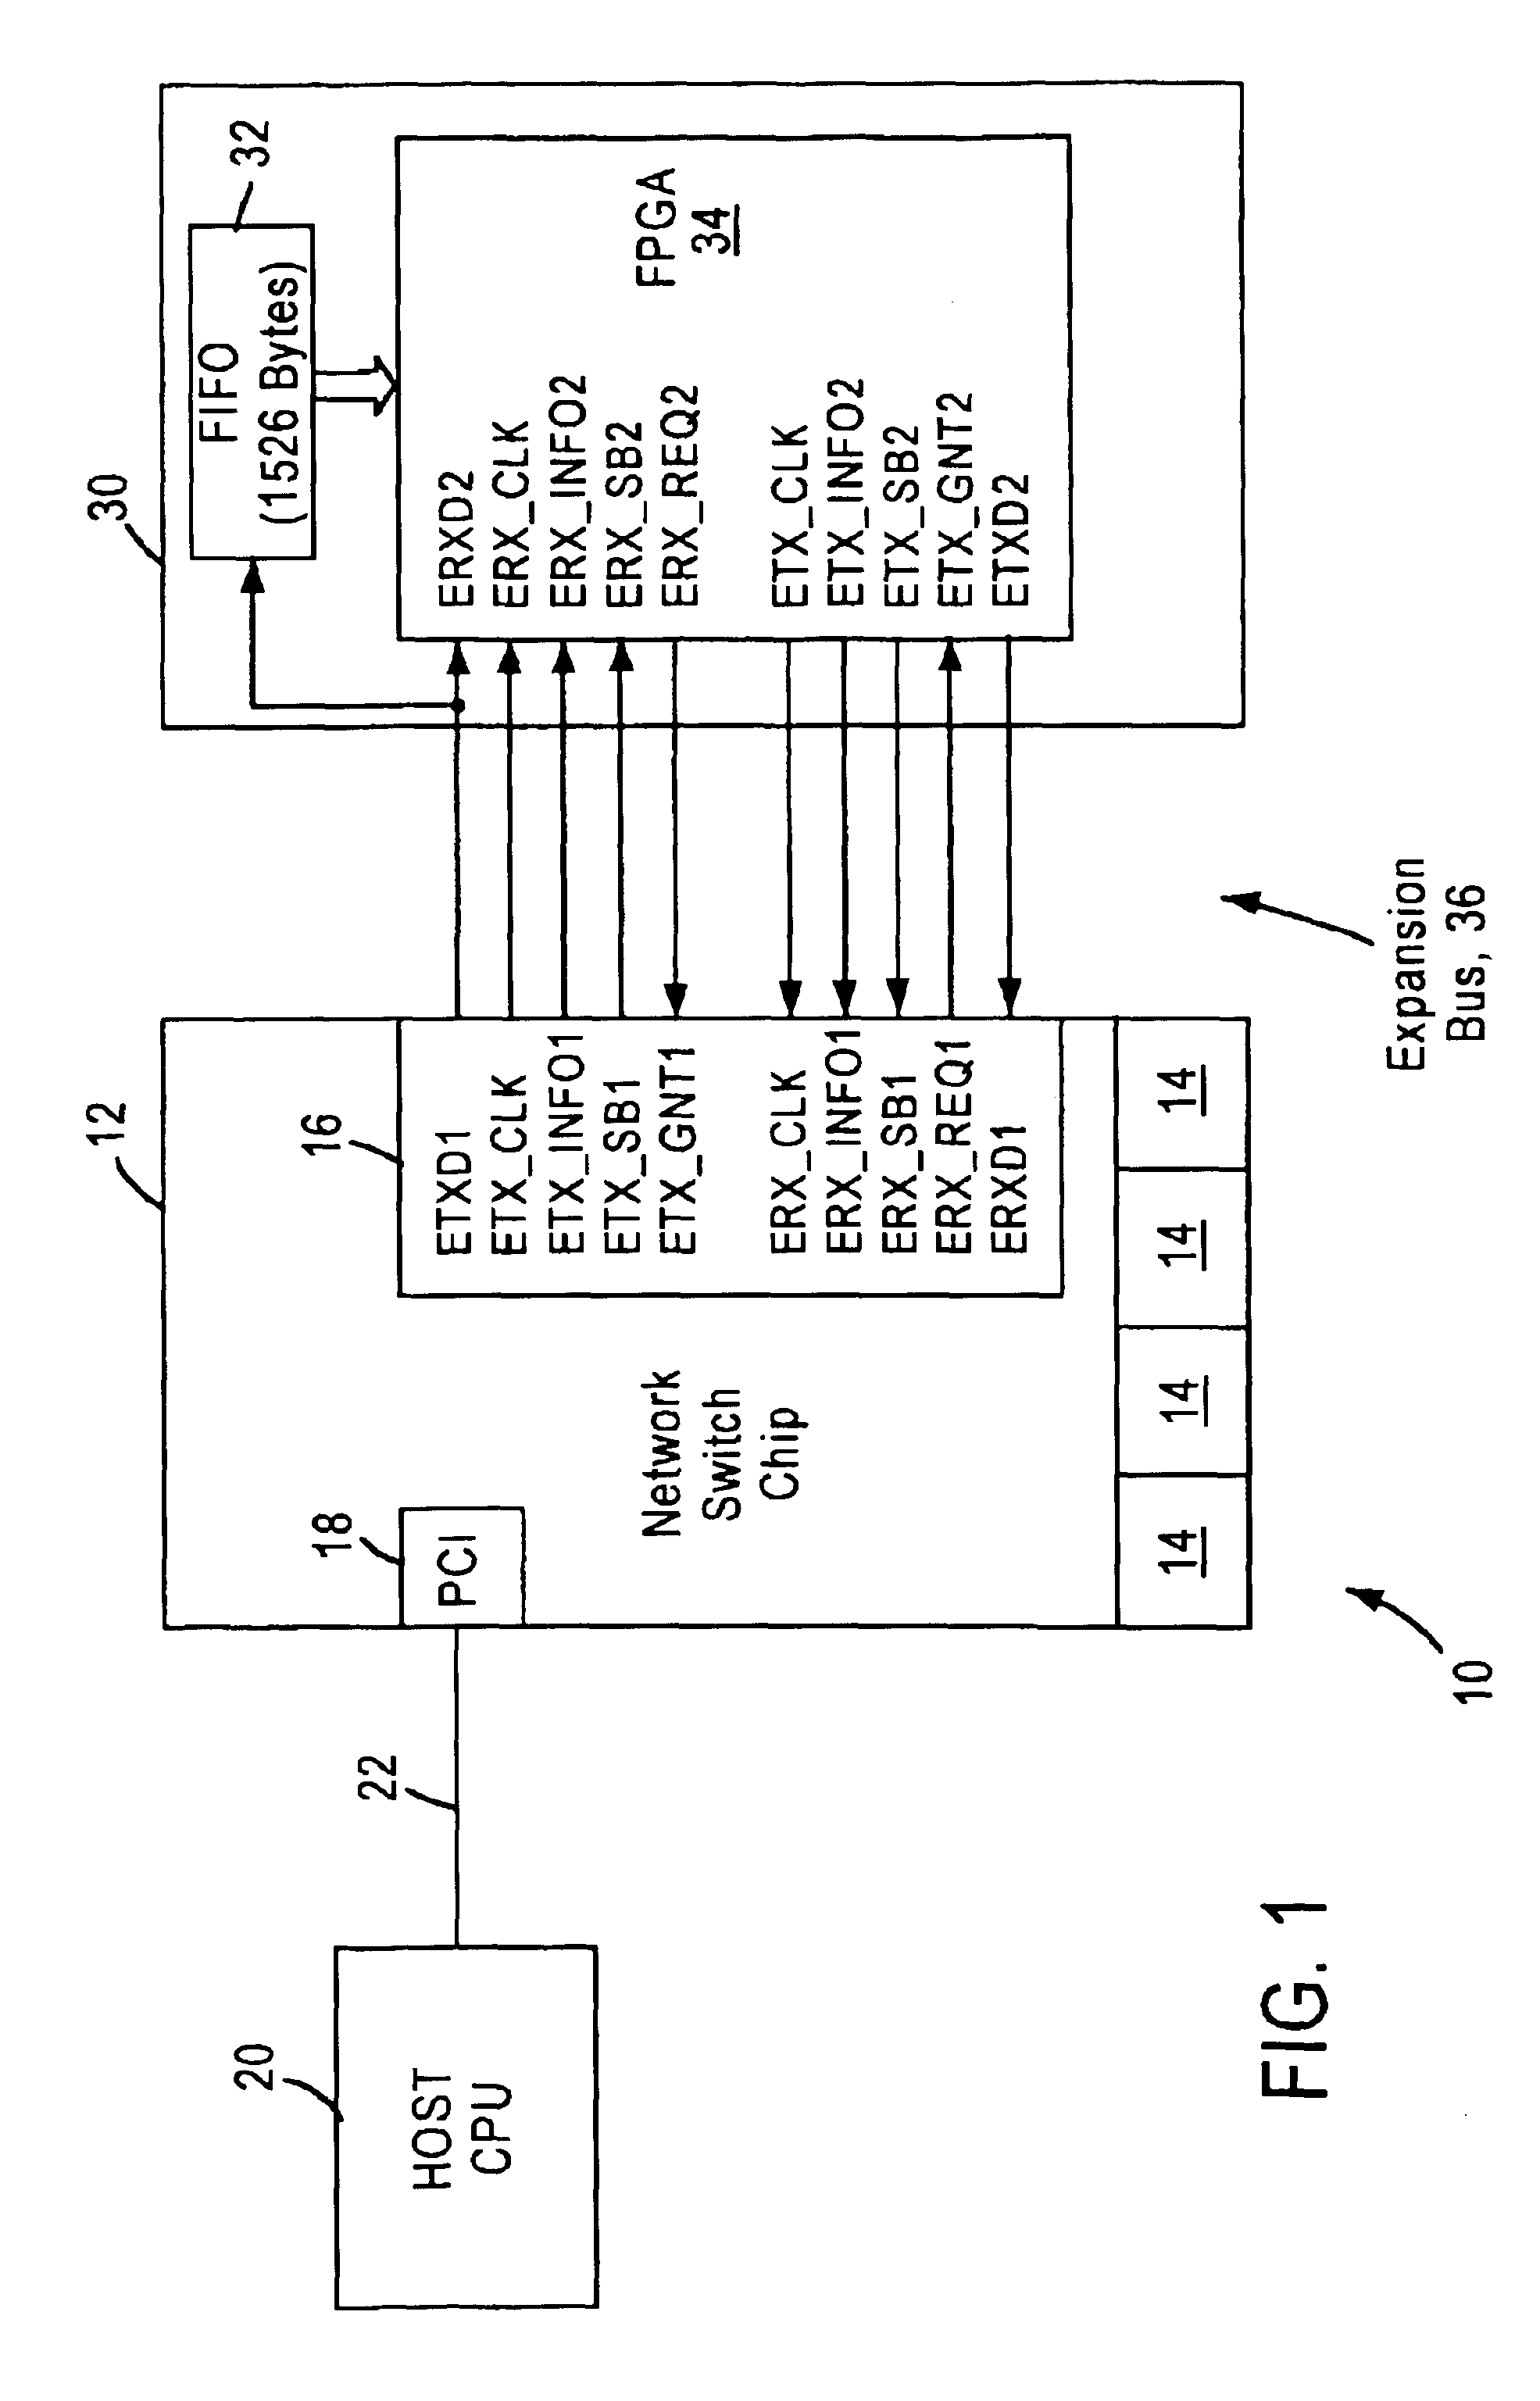 Arrangement for testing network switch expansion port using external logic to emulate connected expansion port